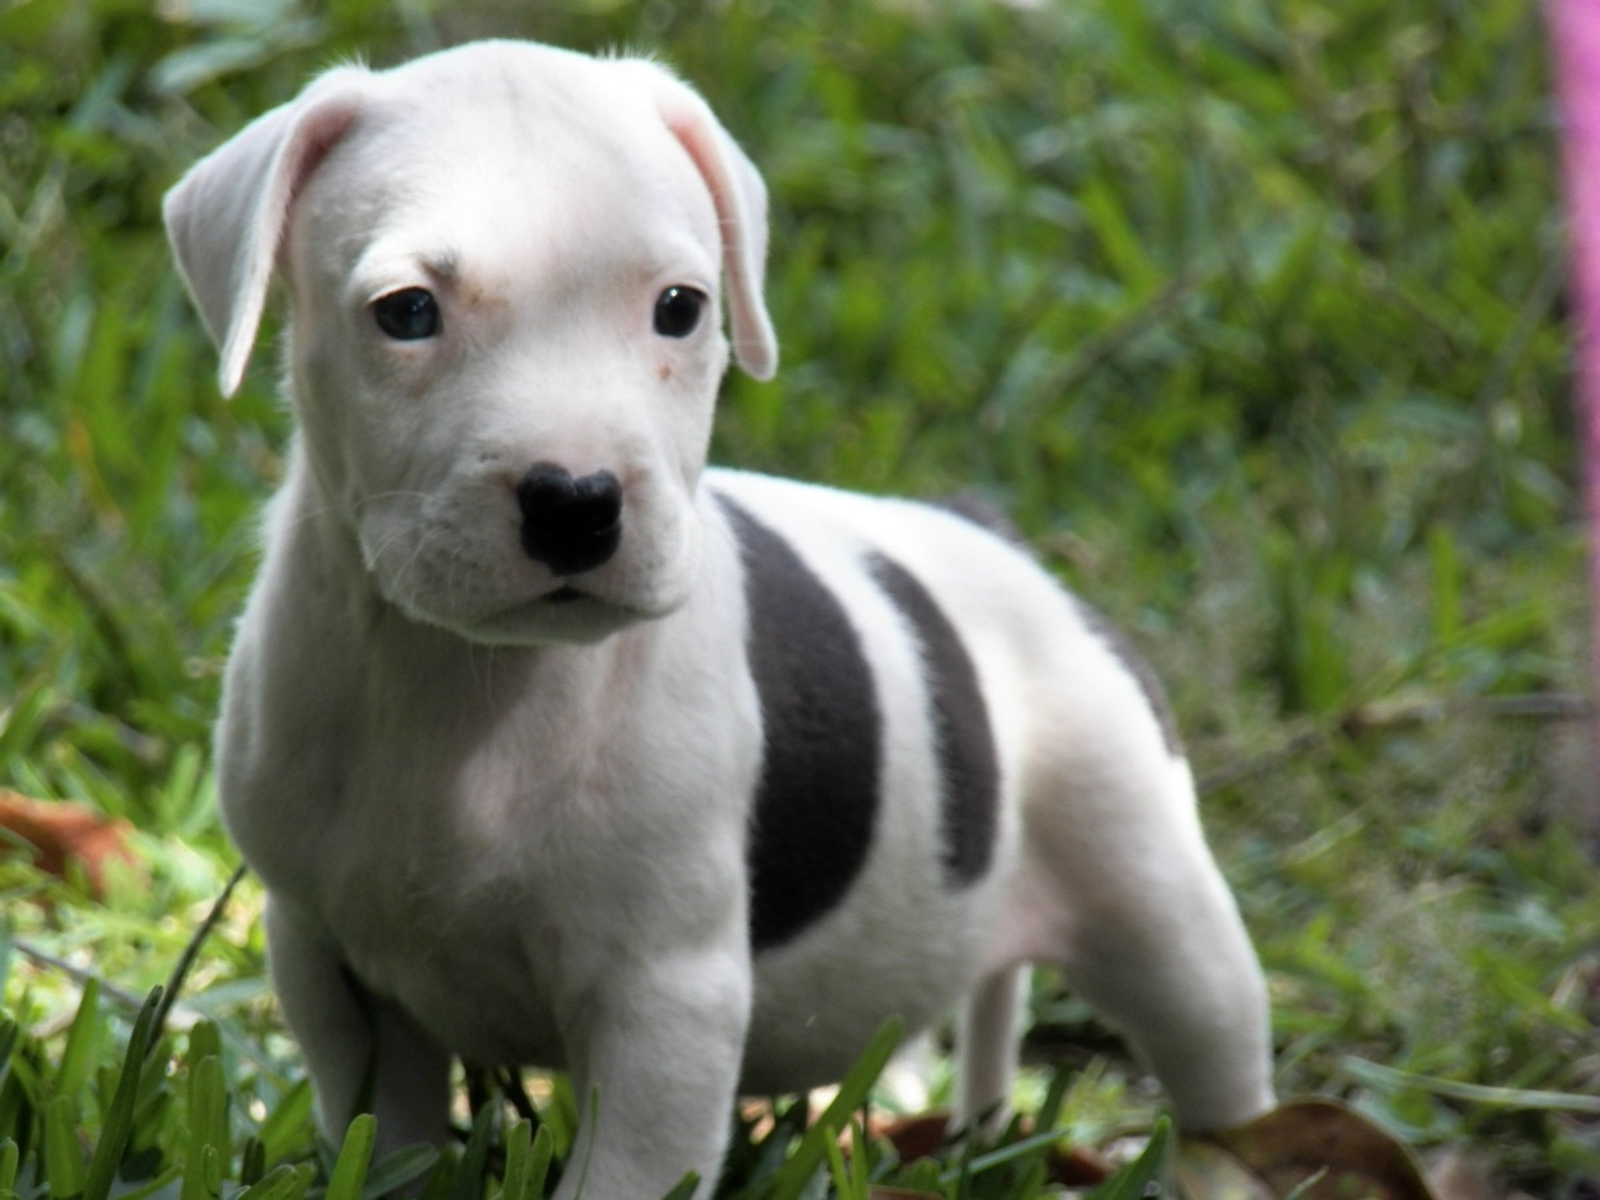 Cute Pitbull Puppies Wallpapers Wallpapers